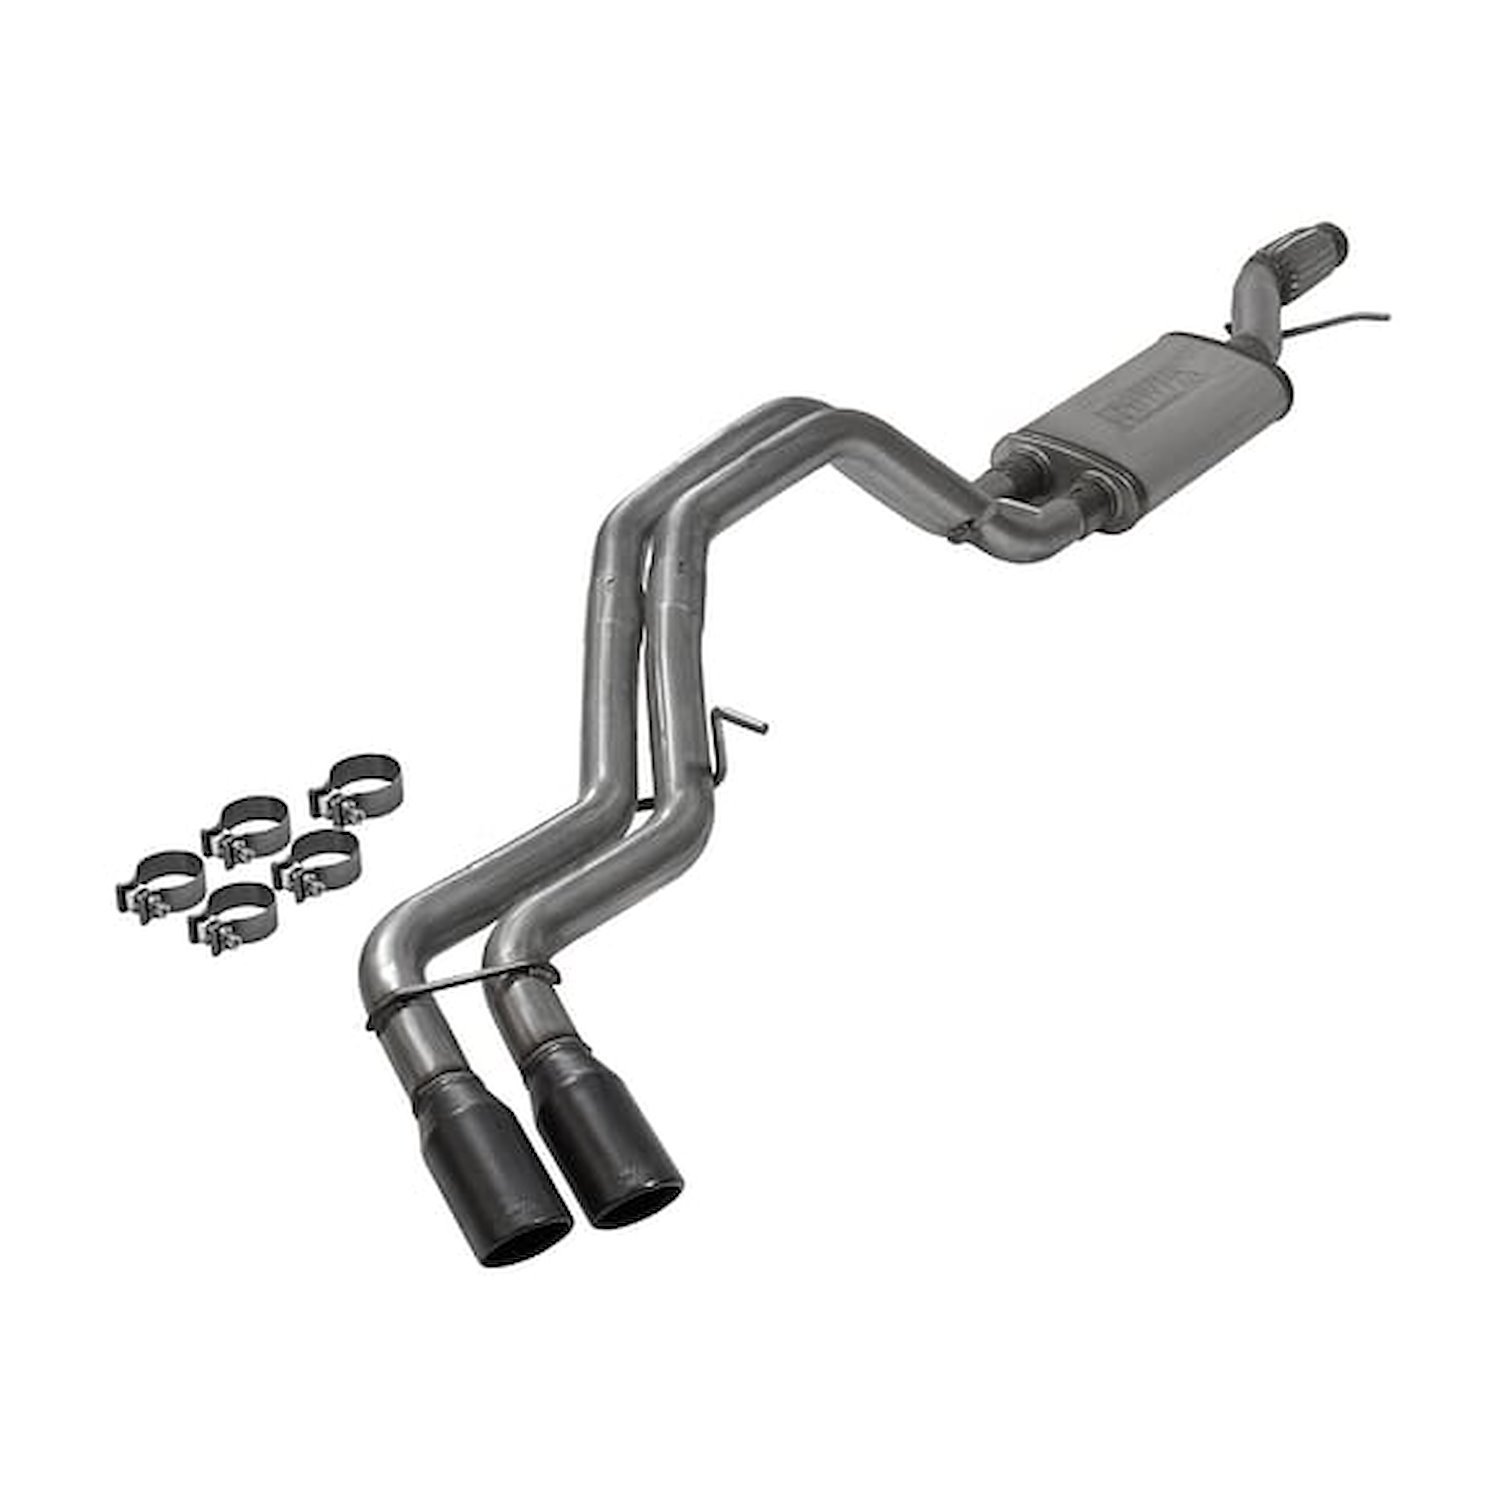 717986 FlowFX Cat-Back Exhaust System for 2015-2020 Chevy Tahoe, GMC Yukon 5.3L